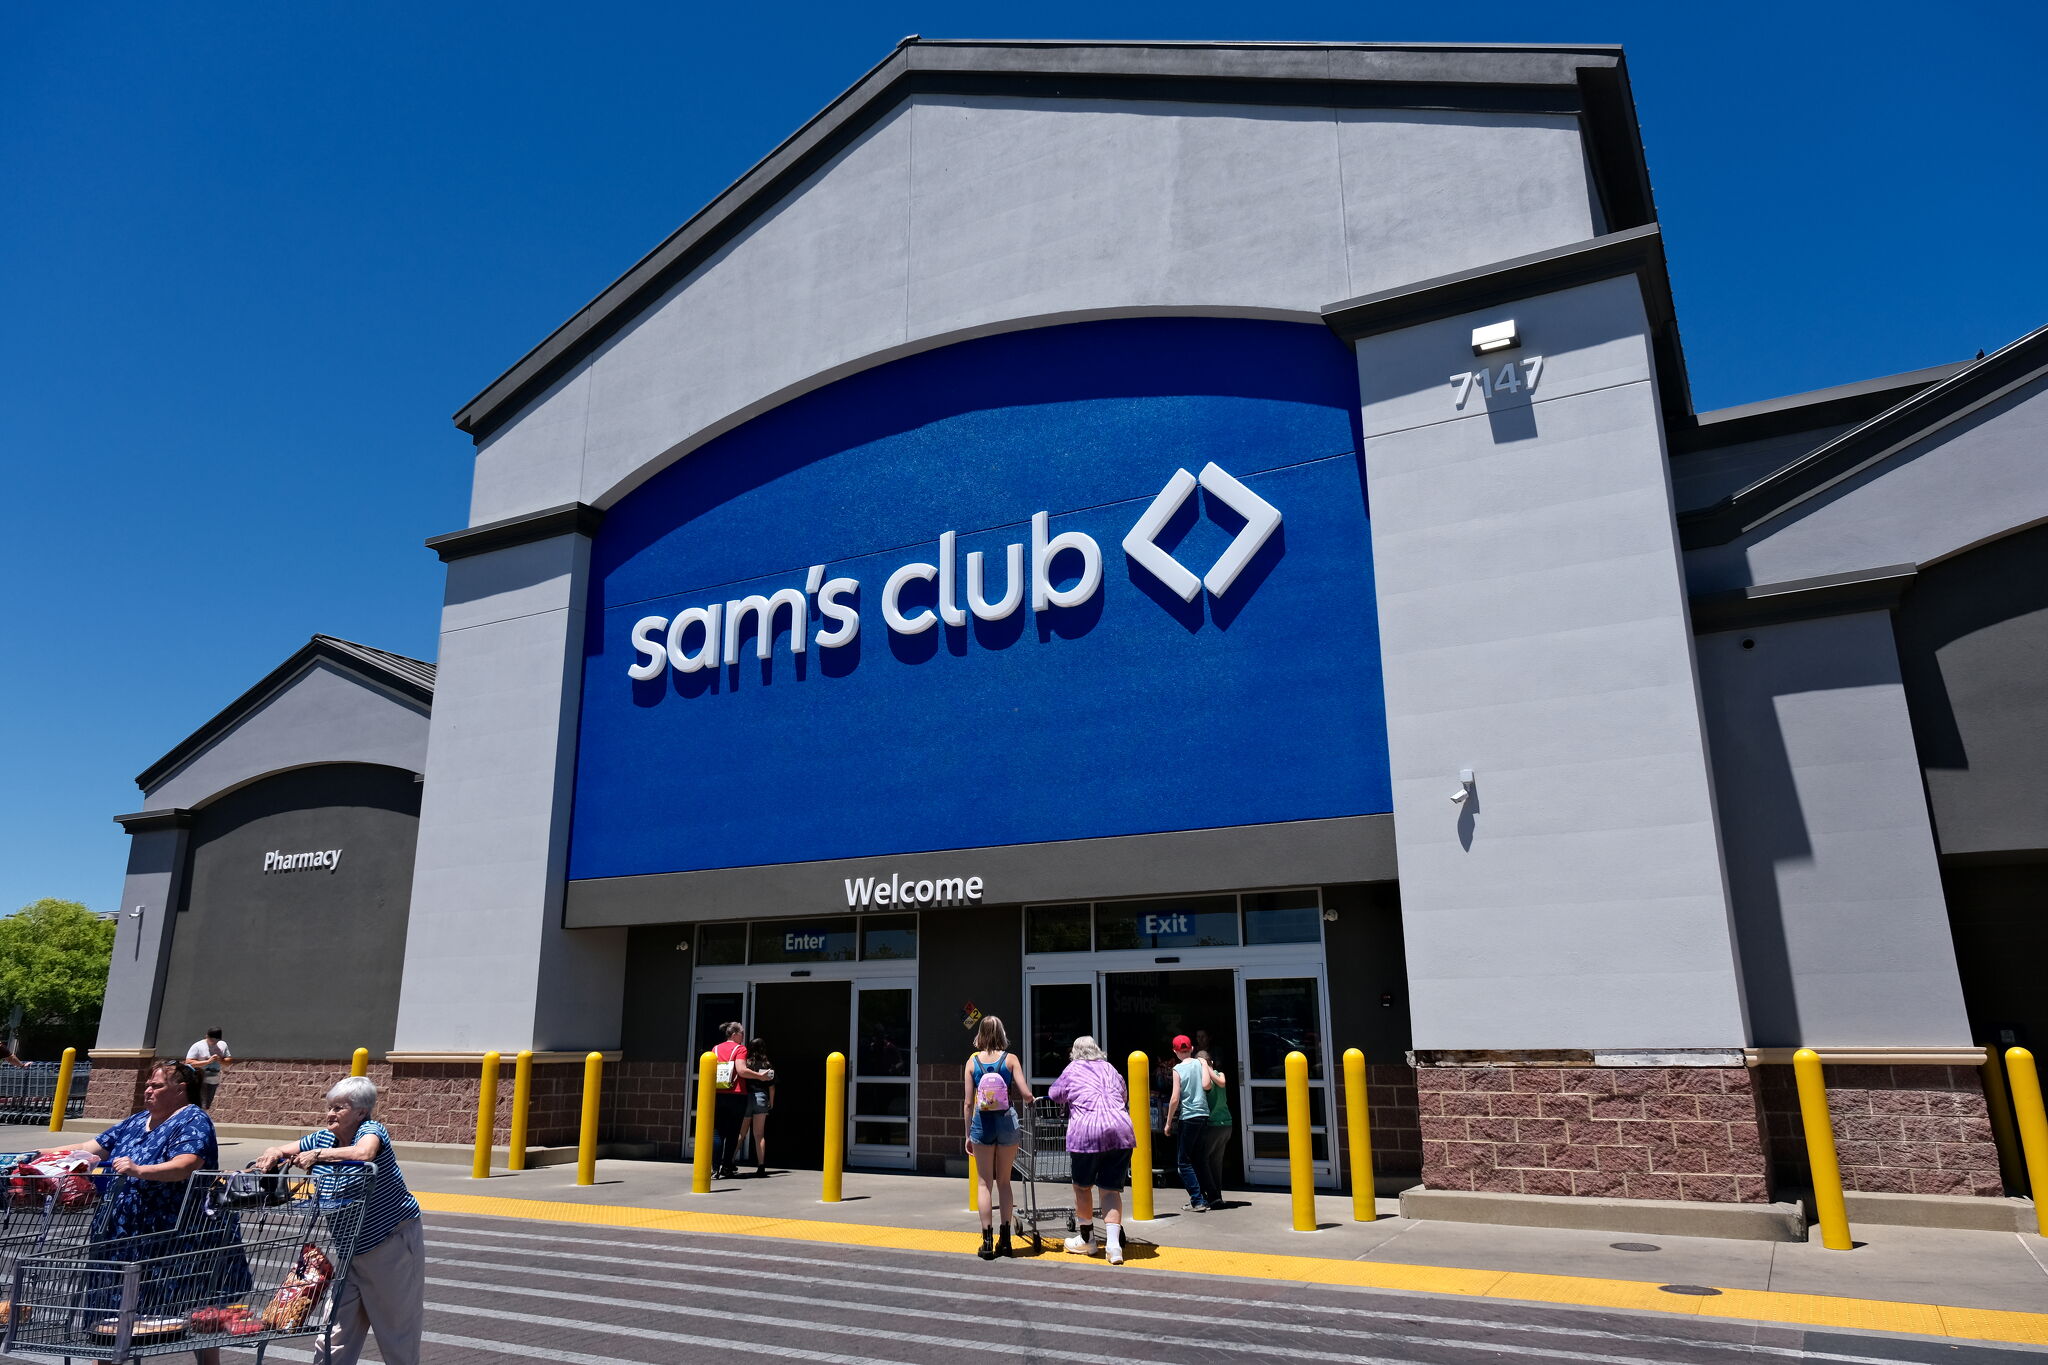 Get a 1year Sam's Club membership for 25 with this deal